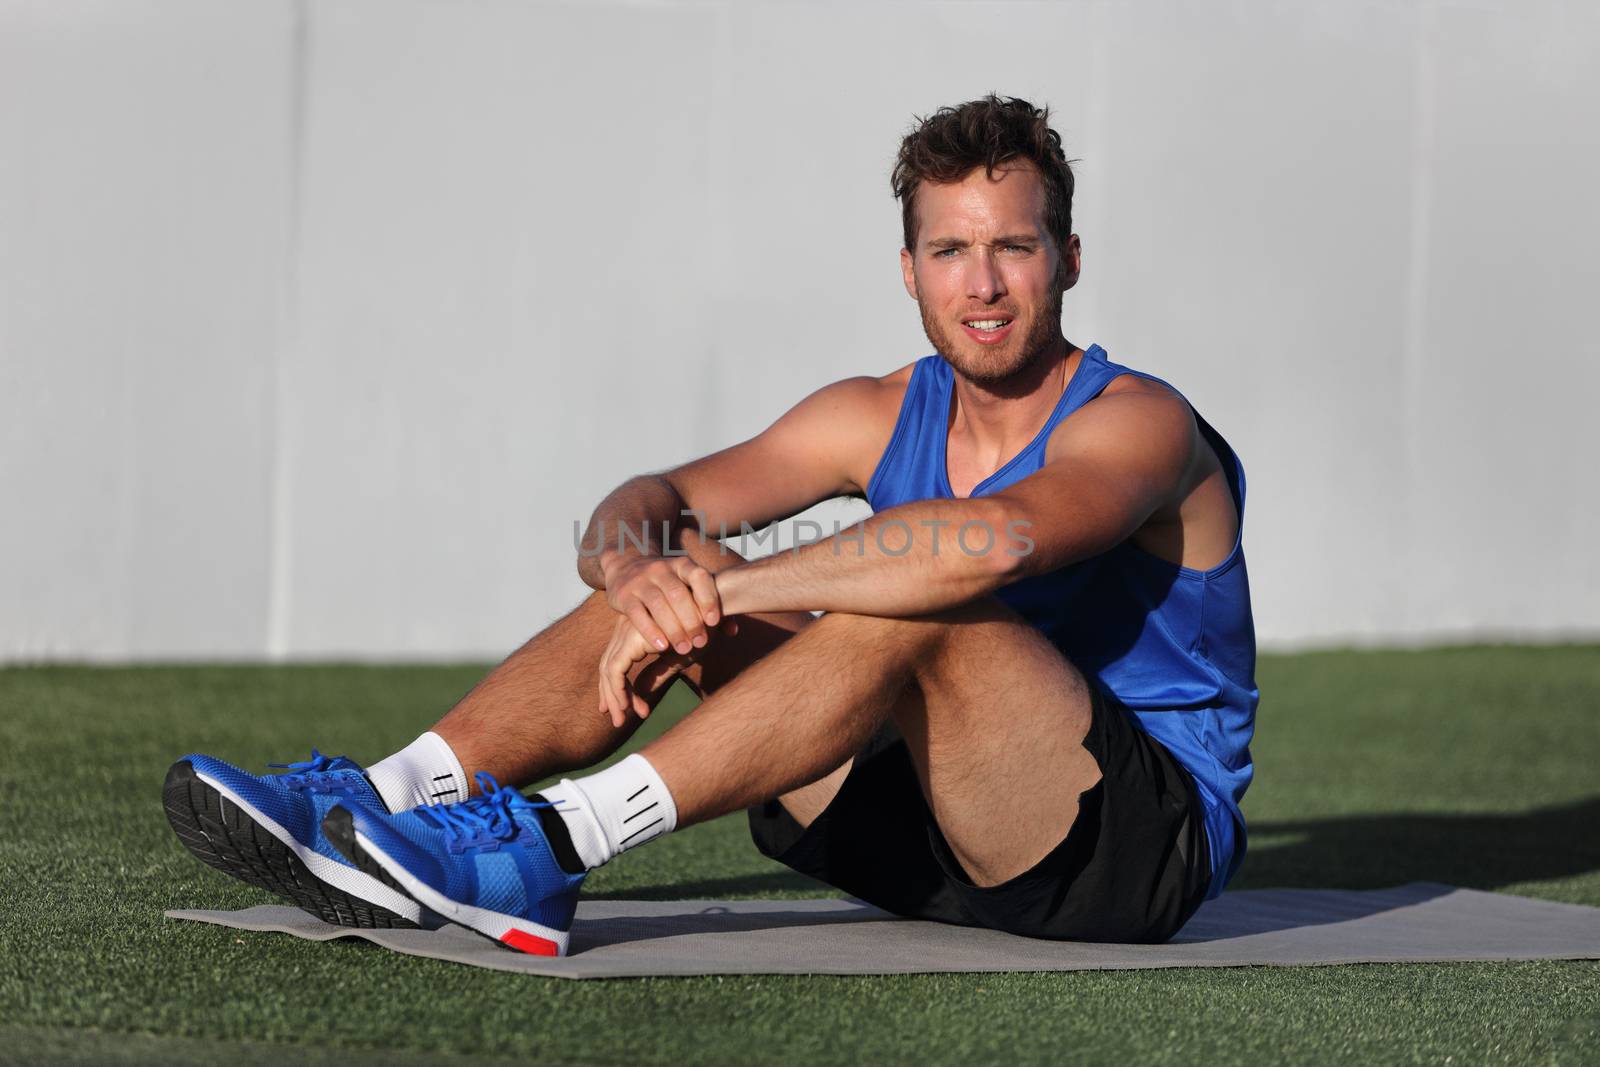 Gym fitness man portrait relaxing on exercise mat at outdoor park . Happy fit male athlete healthy active lifestyle ready for morning yoga practice at home outside on grass.